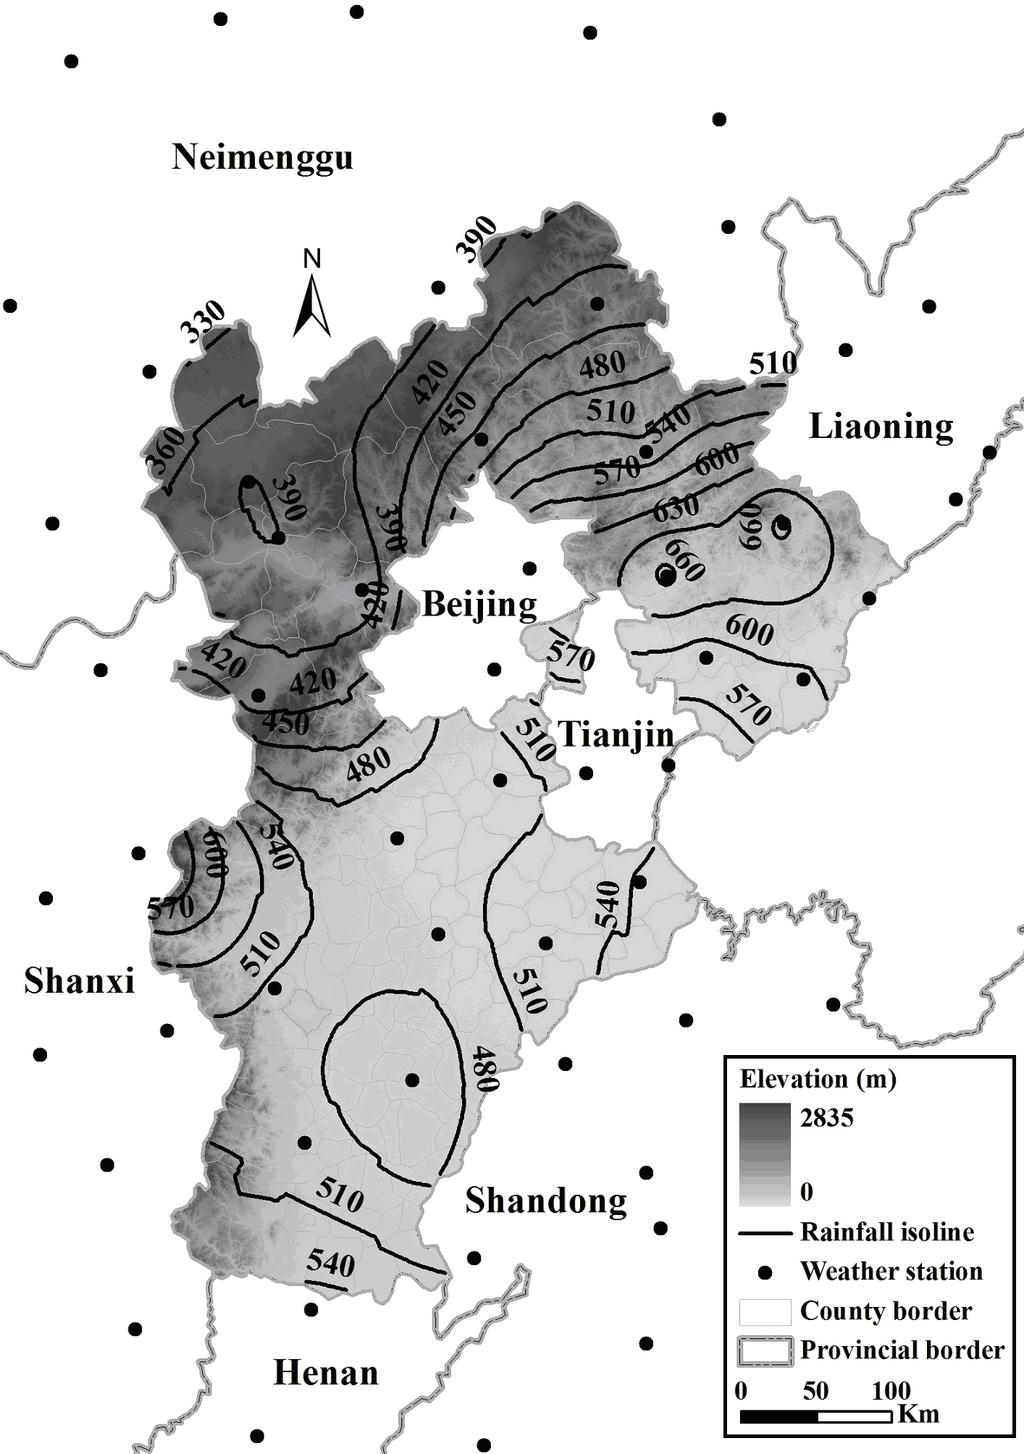 5918 Afr. J. Microbiol. Res. Figure 1. Geographical position of Hebei Province.